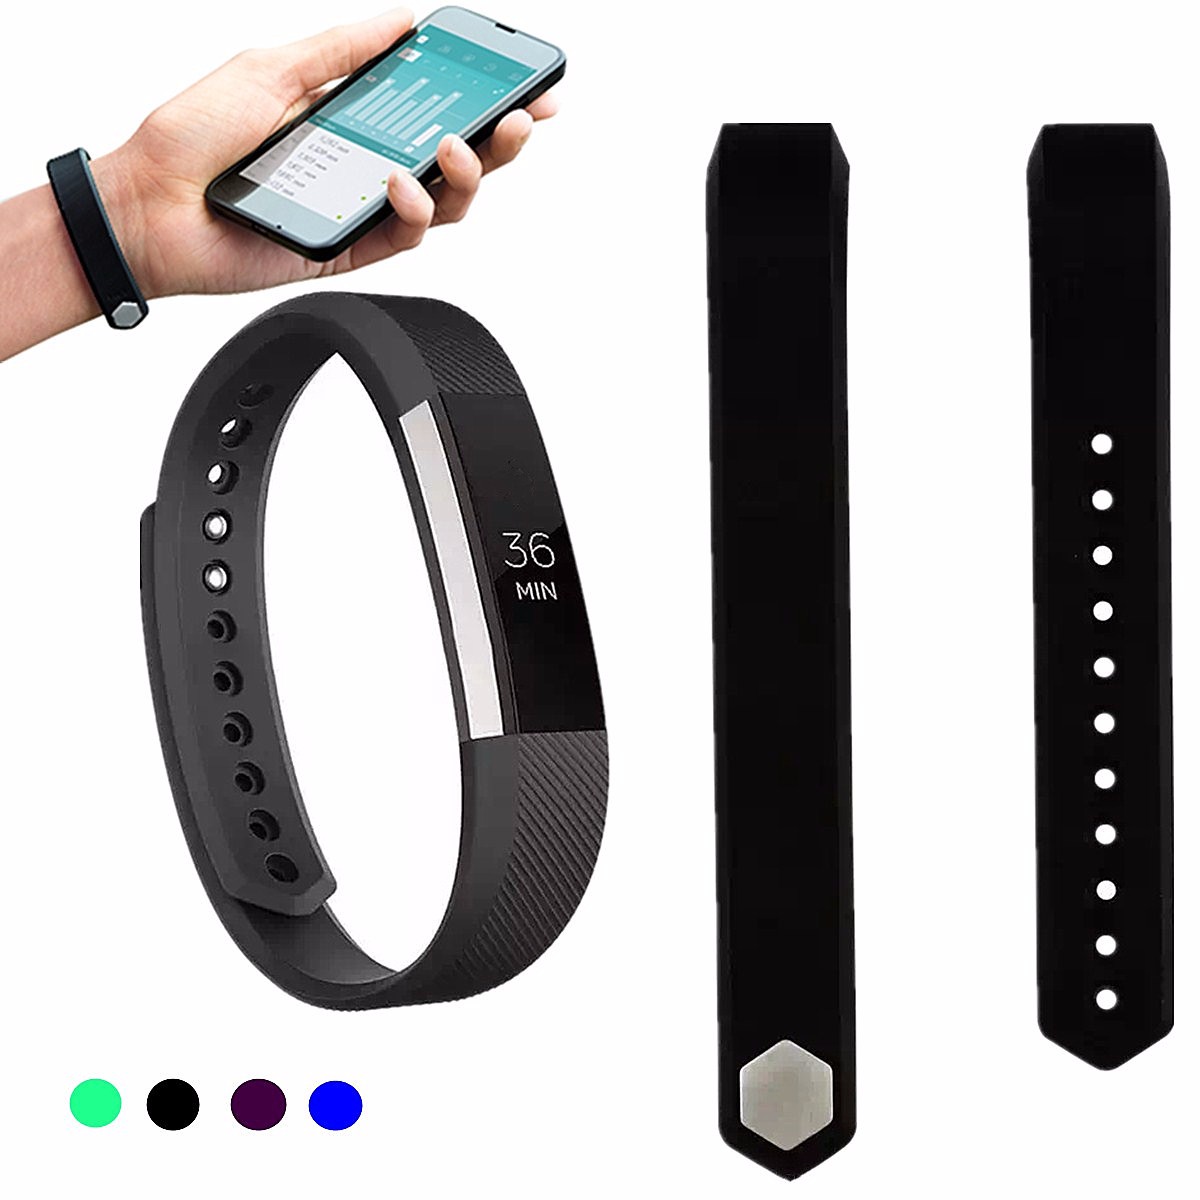 Silicone-Wristband-Watch-Band-Strap-Replace-Large-Size-For-Fitbit-Alta-Smart-Tracker-1100051